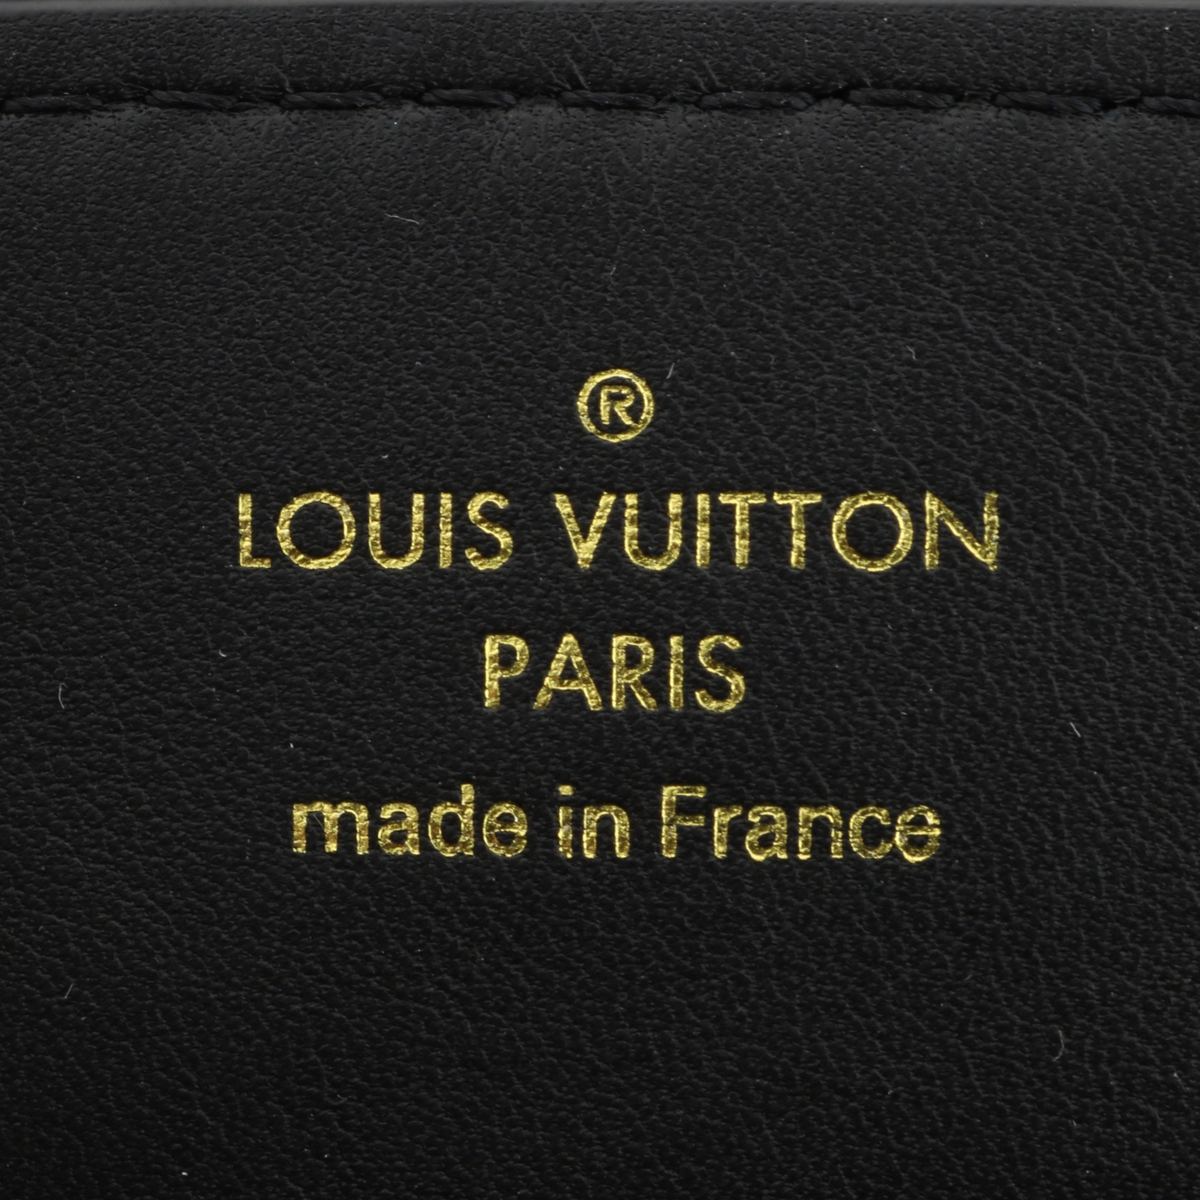 Louis Vuitton New Wave Chain Tote Black Leather with Aged Gold Hardware  2018 - BoutiQi Bags